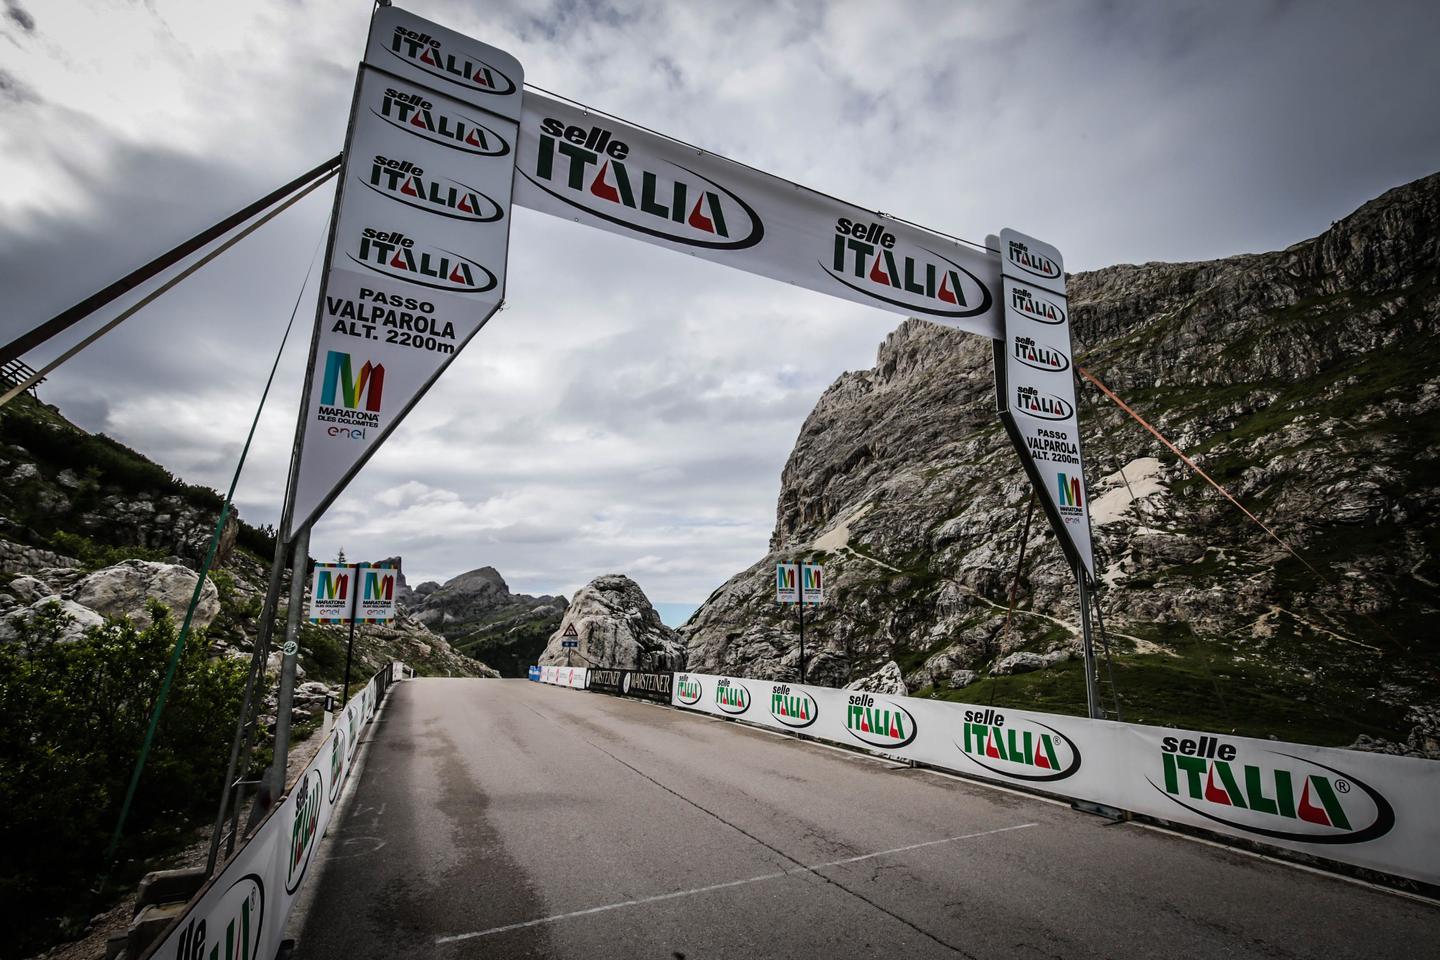 Passo Valparola in the Dolomites, Italy, marked by a cycling race banner and surrounded by stunning mountain scenery.